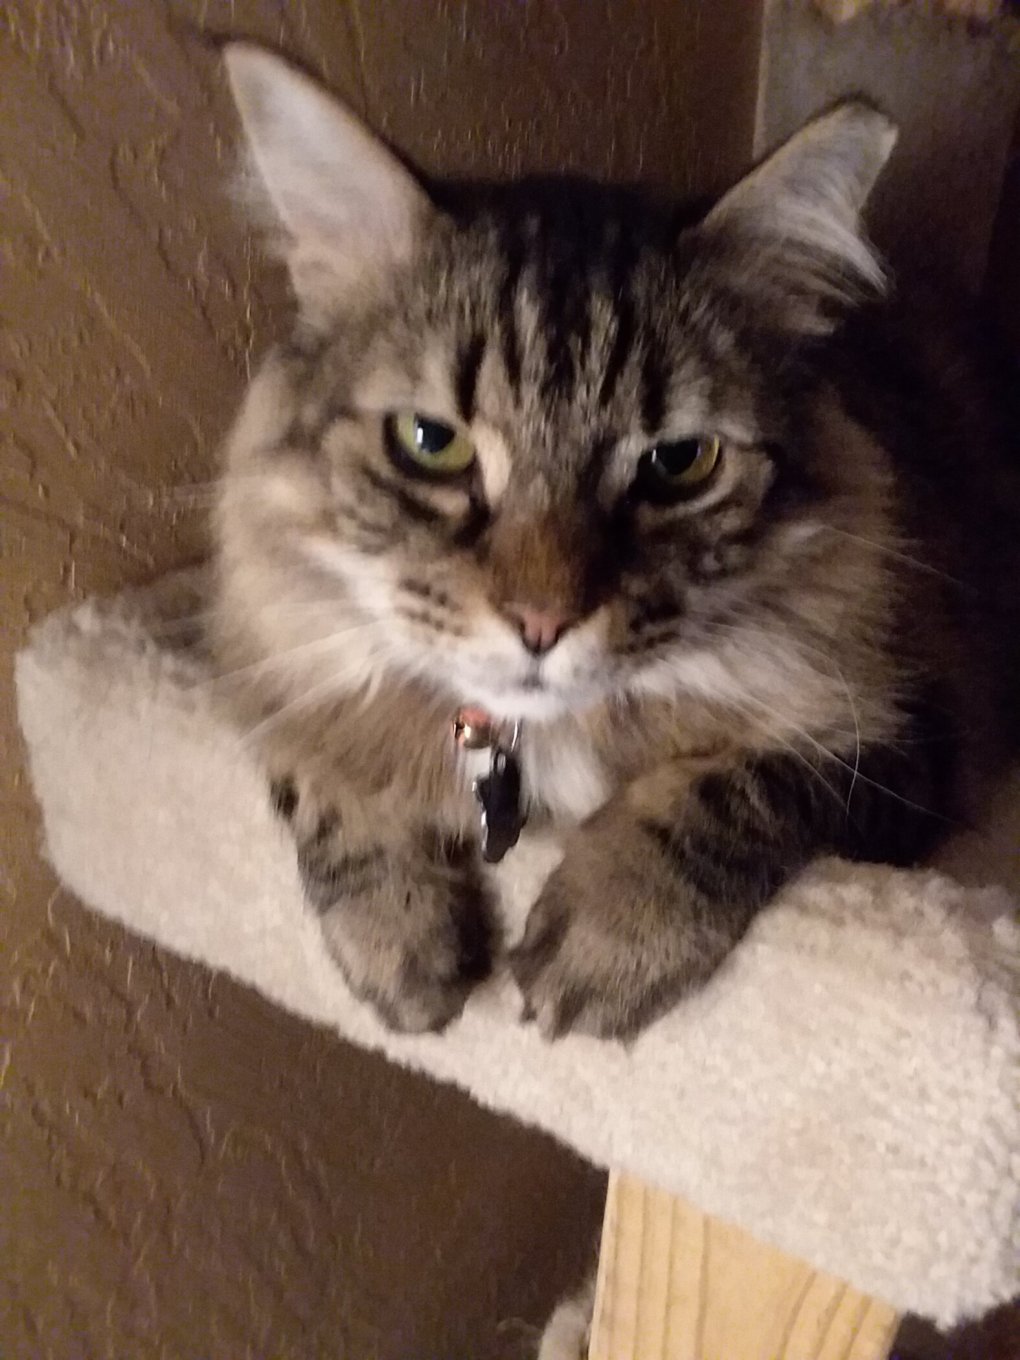 Guest Cat Star: Texas the Maine Coon Mix